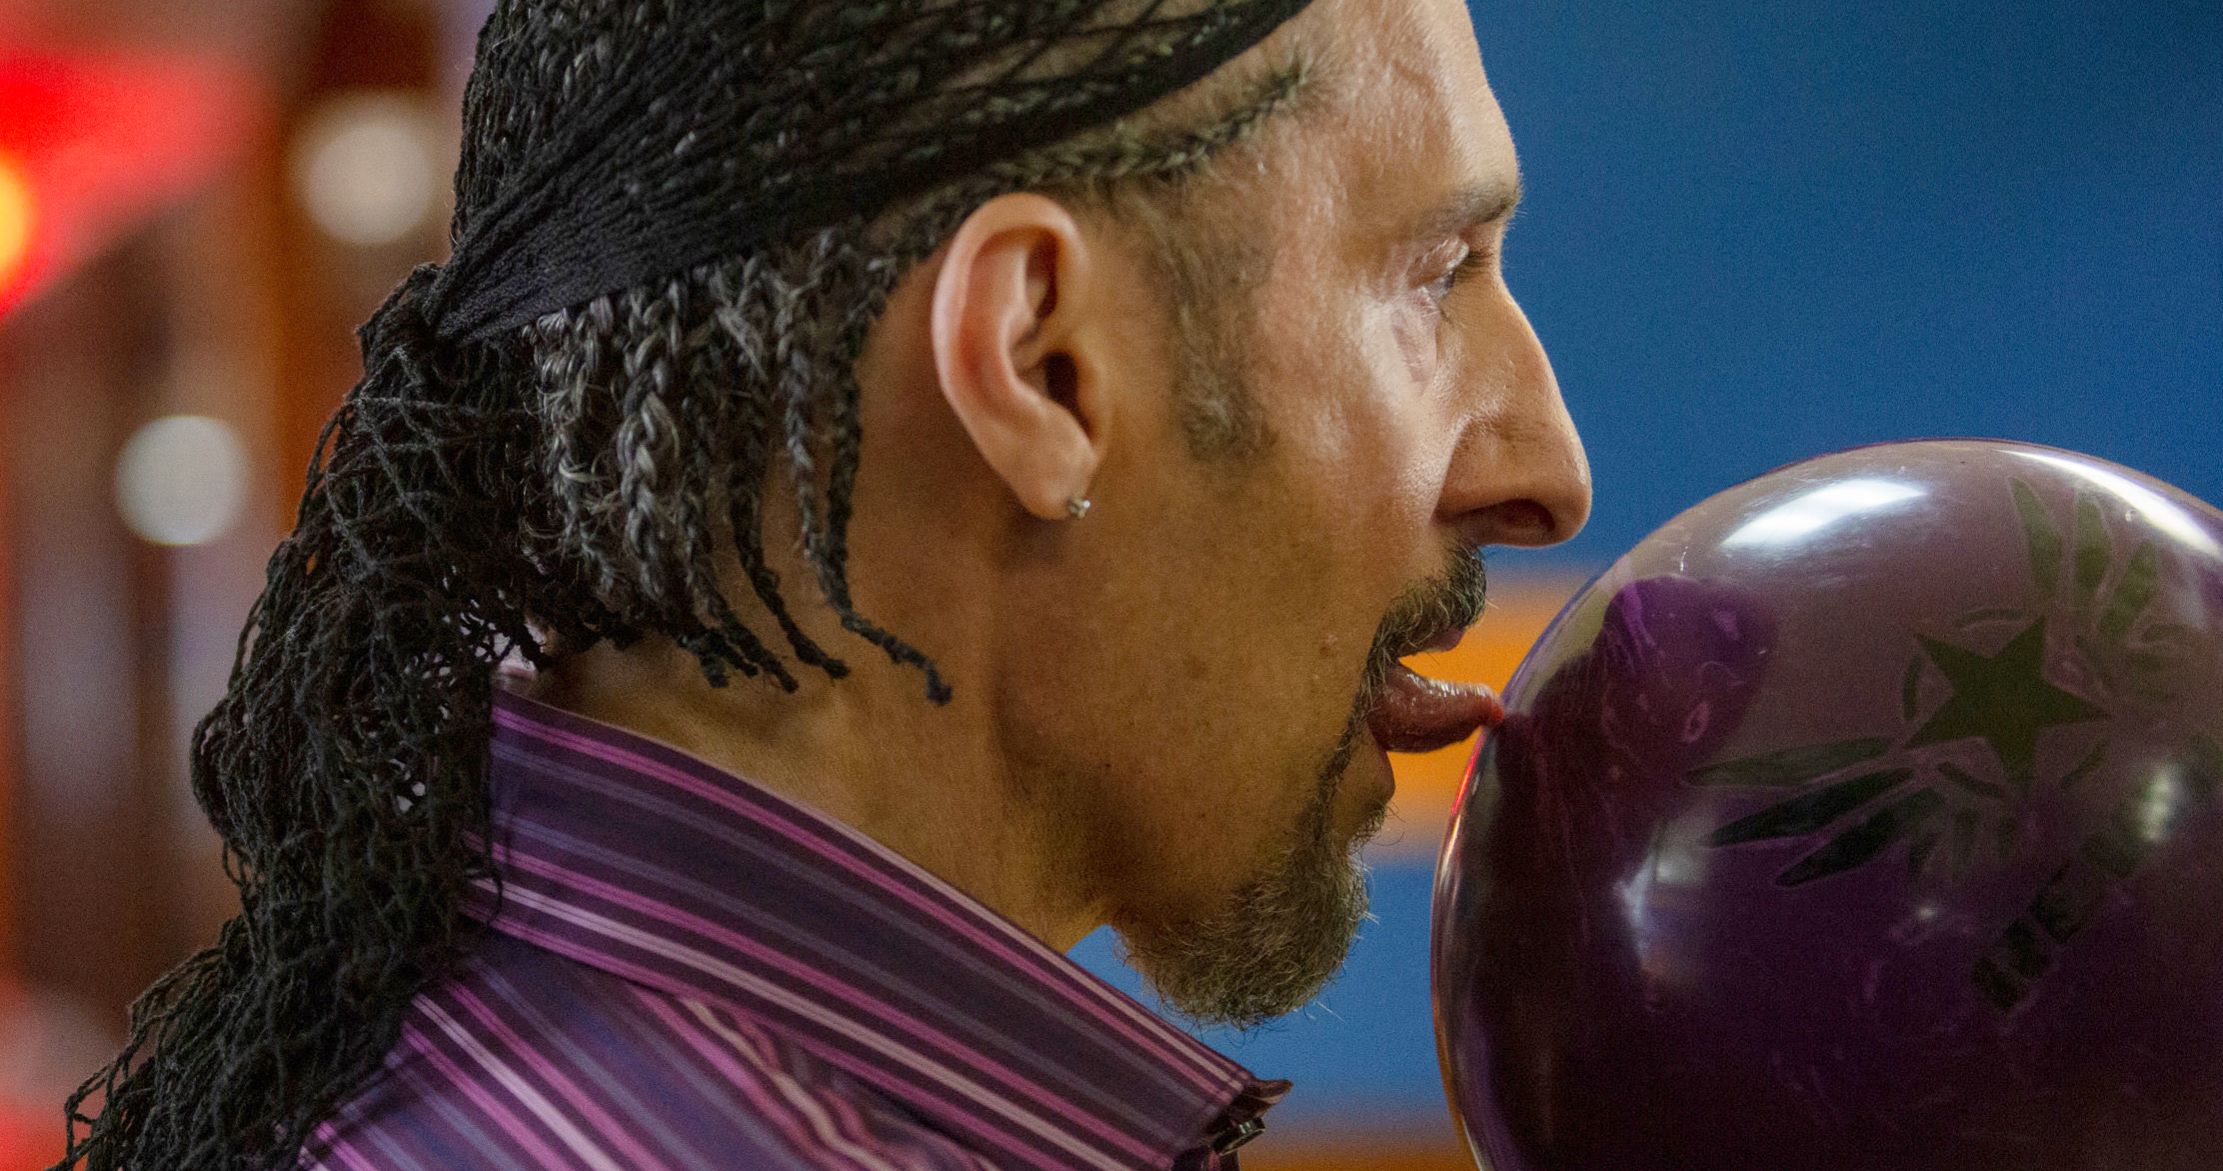 The Big Lebowski Spin-Off The Jesus Rolls Is Coming to Theaters in 2020